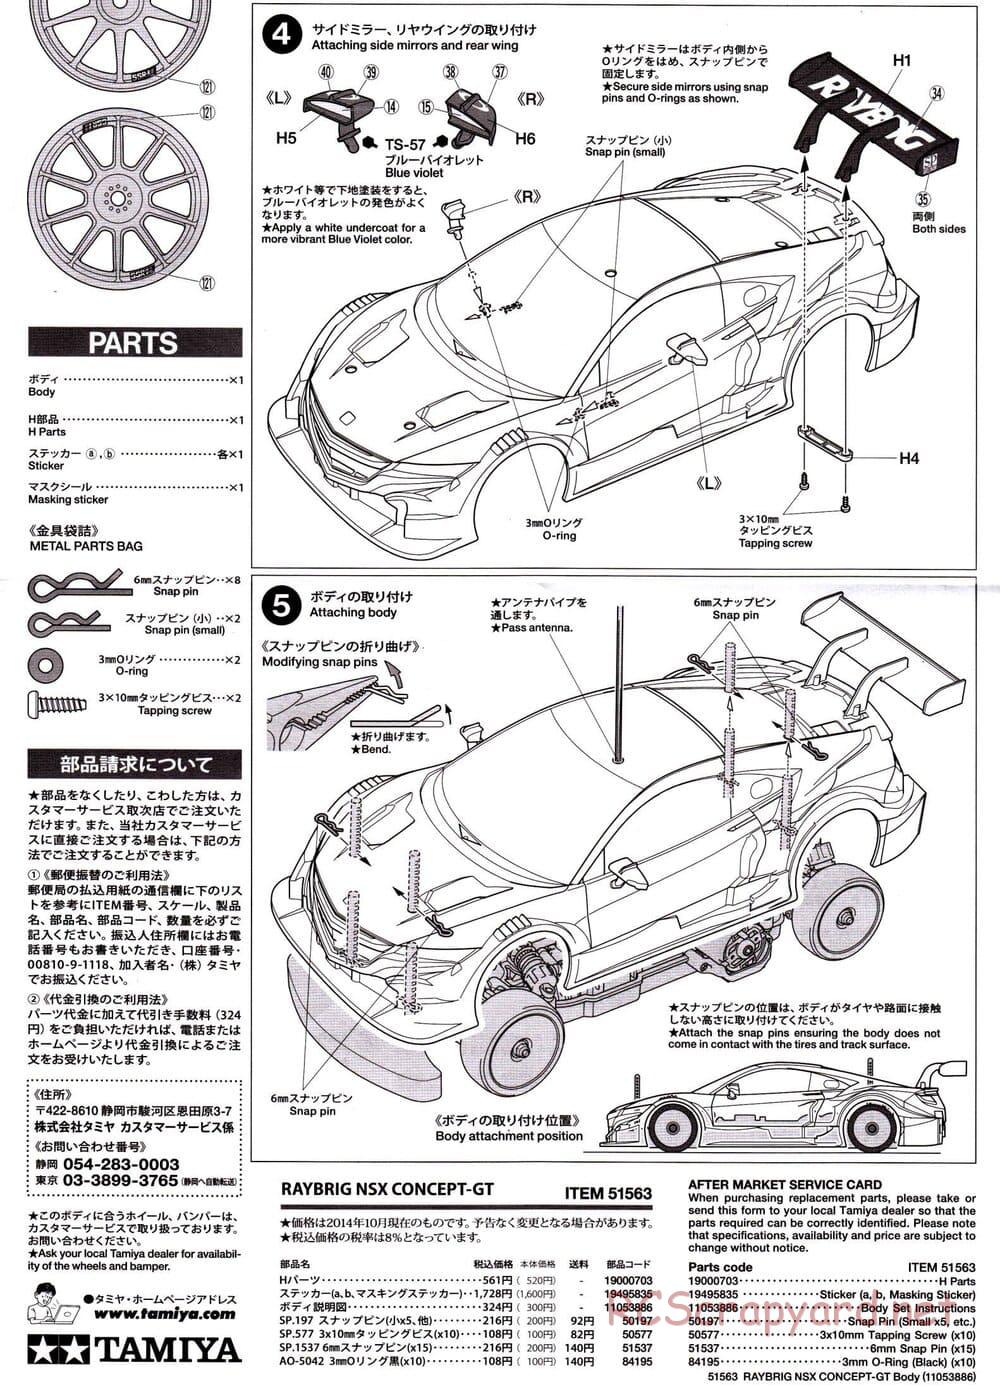 Tamiya - Raybrig NSX Concept GT - TB-04 Chassis - Body Manual - Page 4